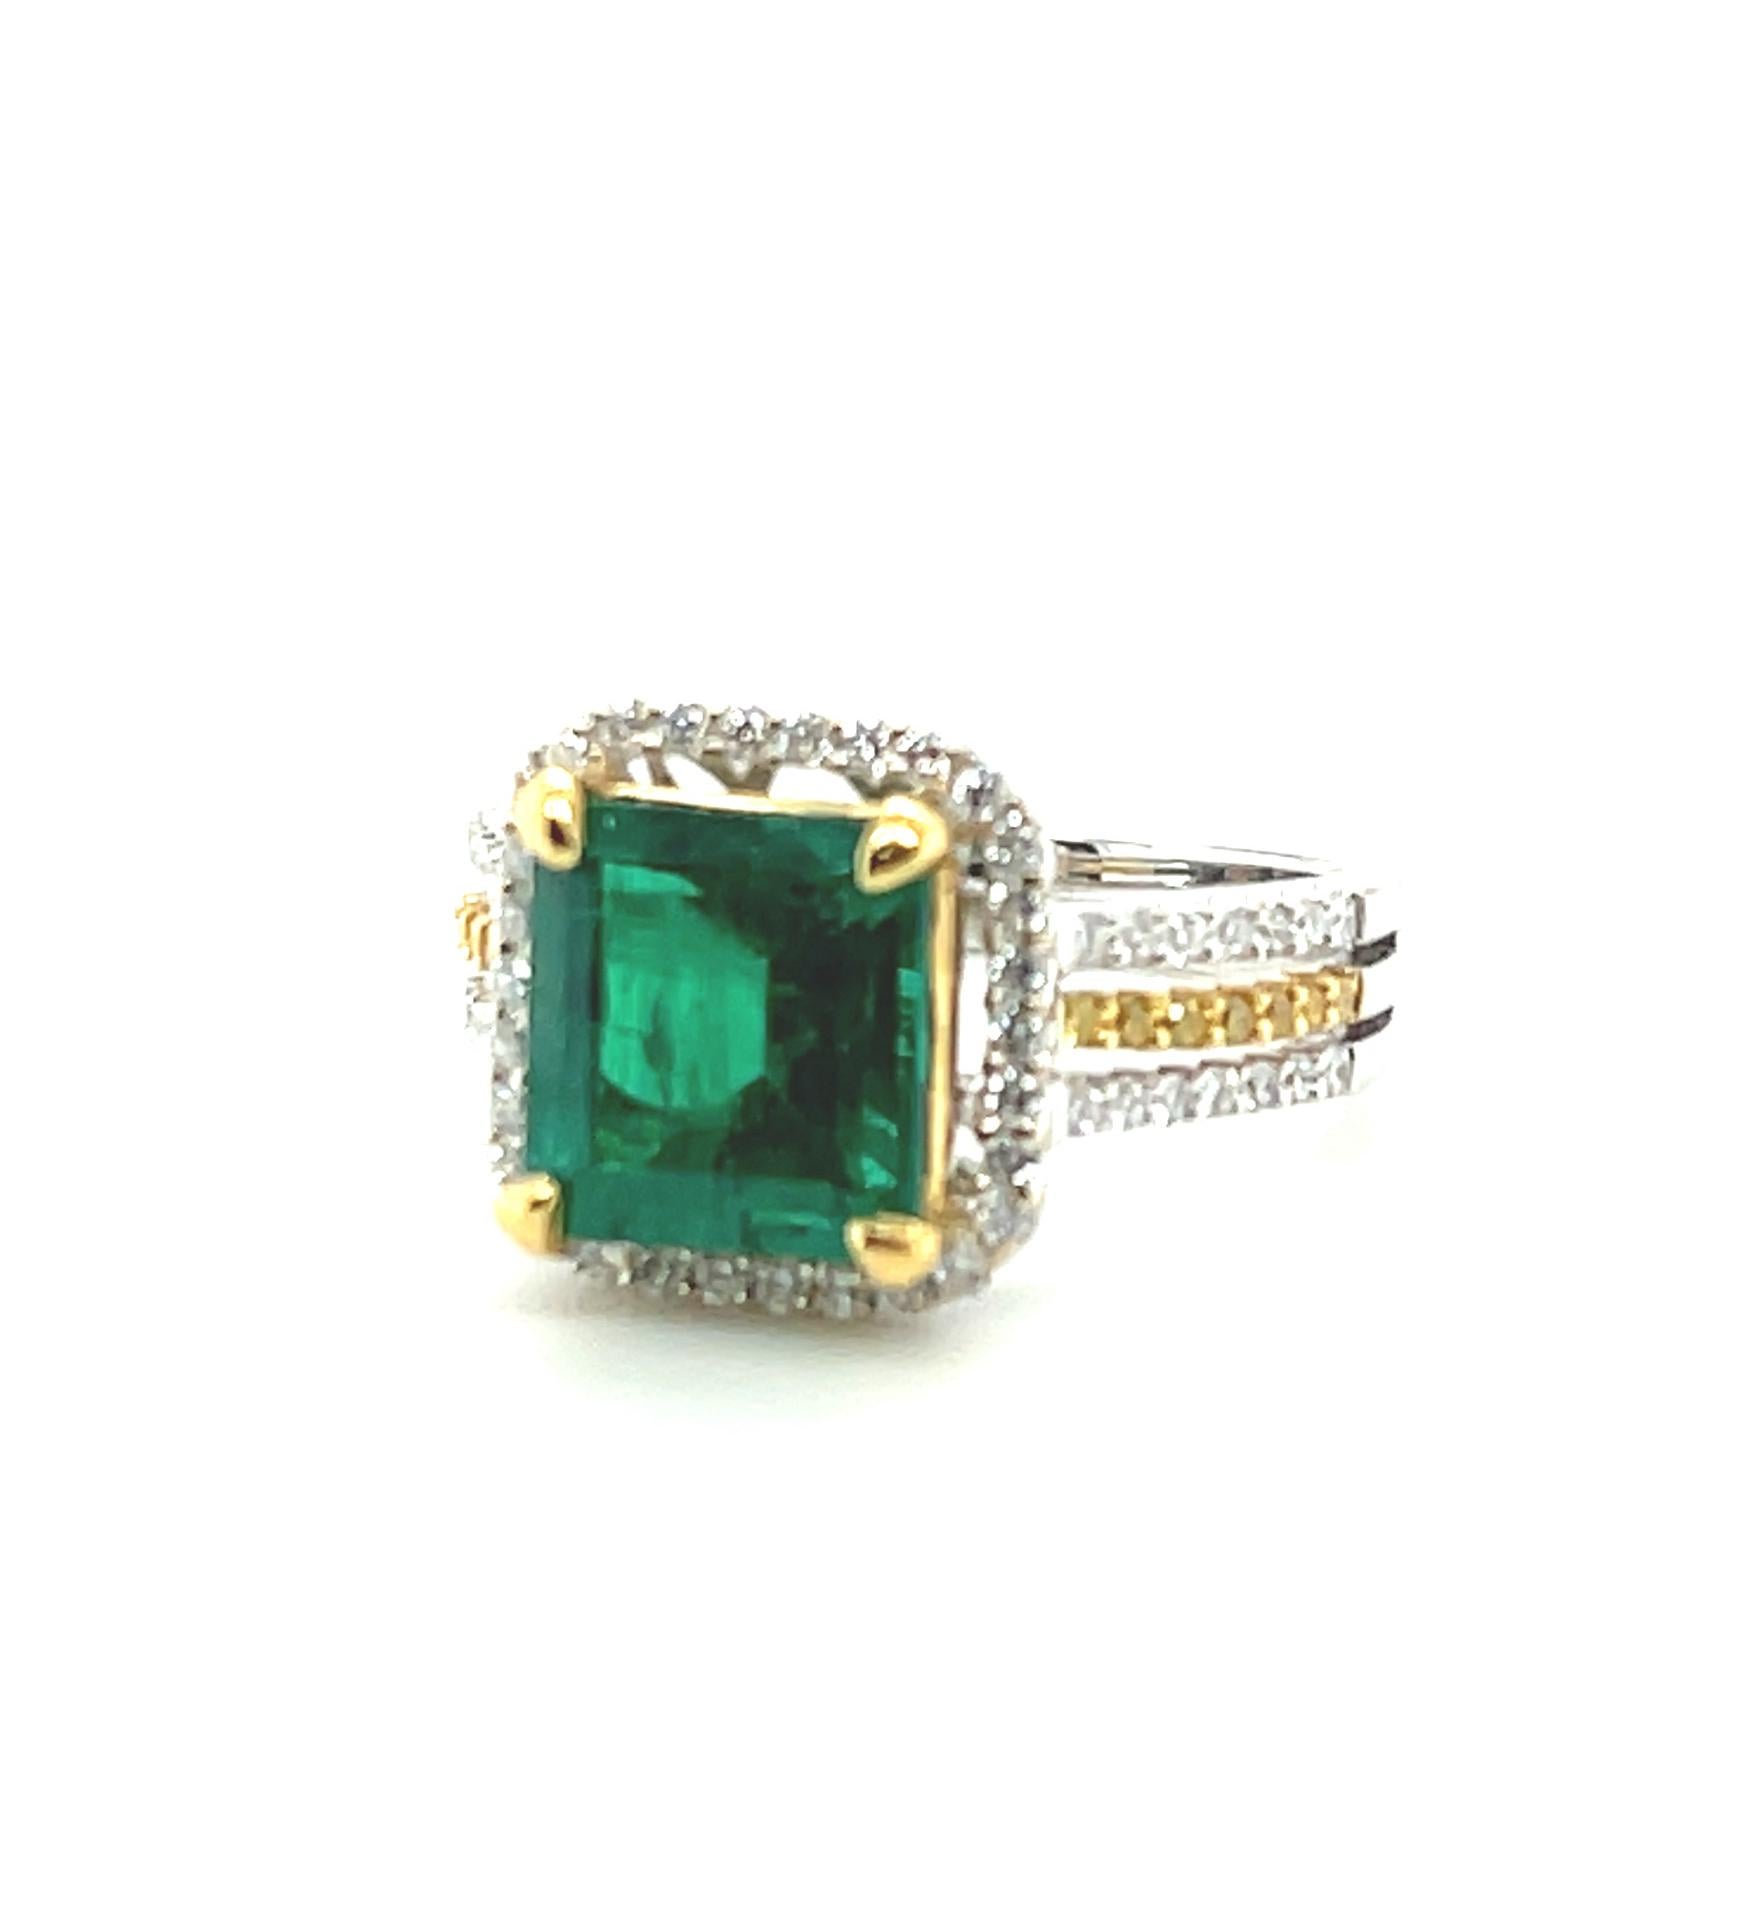 Emerald Cut 2.85 Carat Emerald Cocktail Ring with Canary and White Diamonds in 18k Gold For Sale